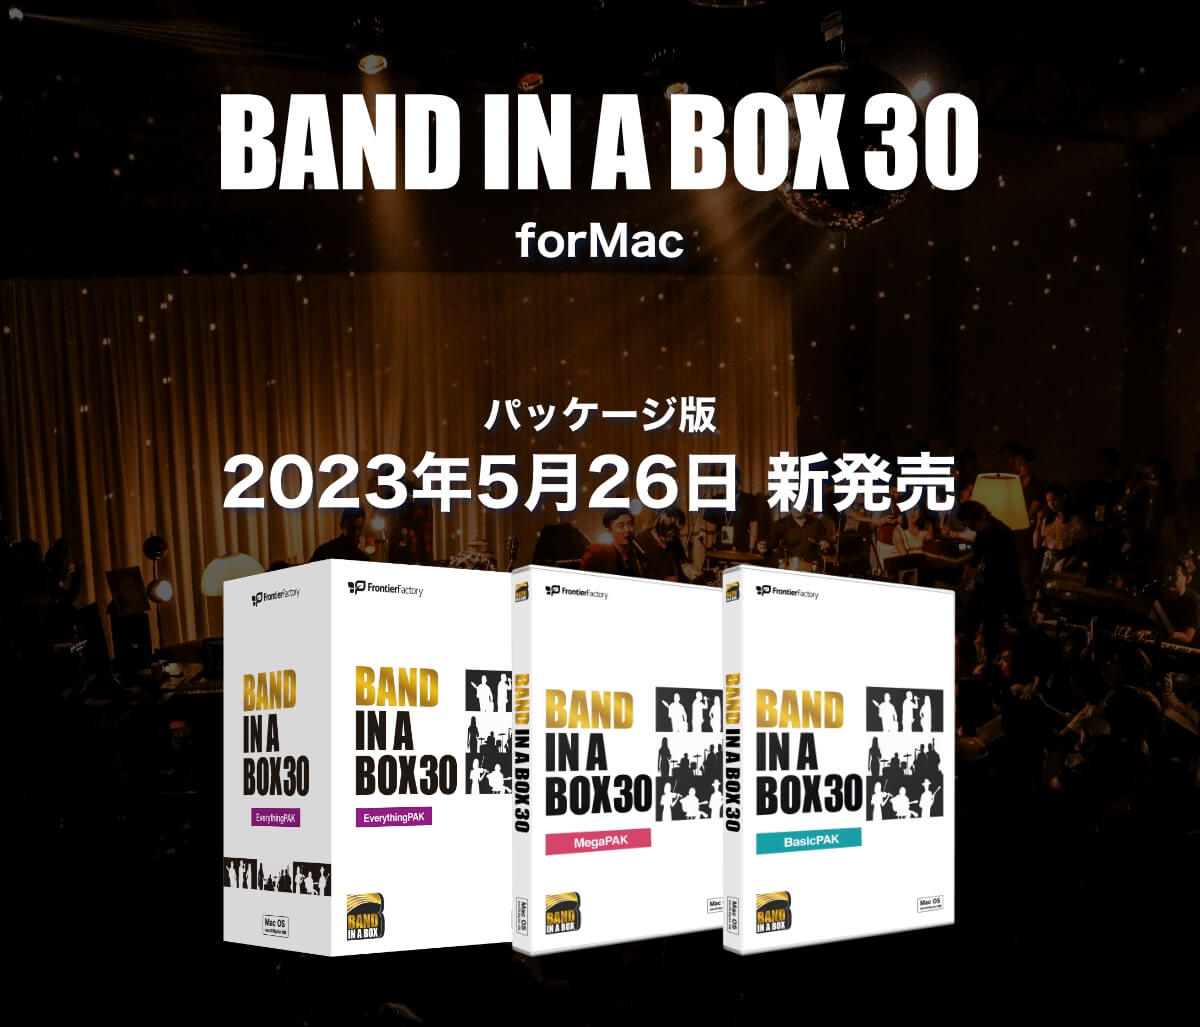 『Band-in-a-Box 30 for Mac』発売のお知らせ